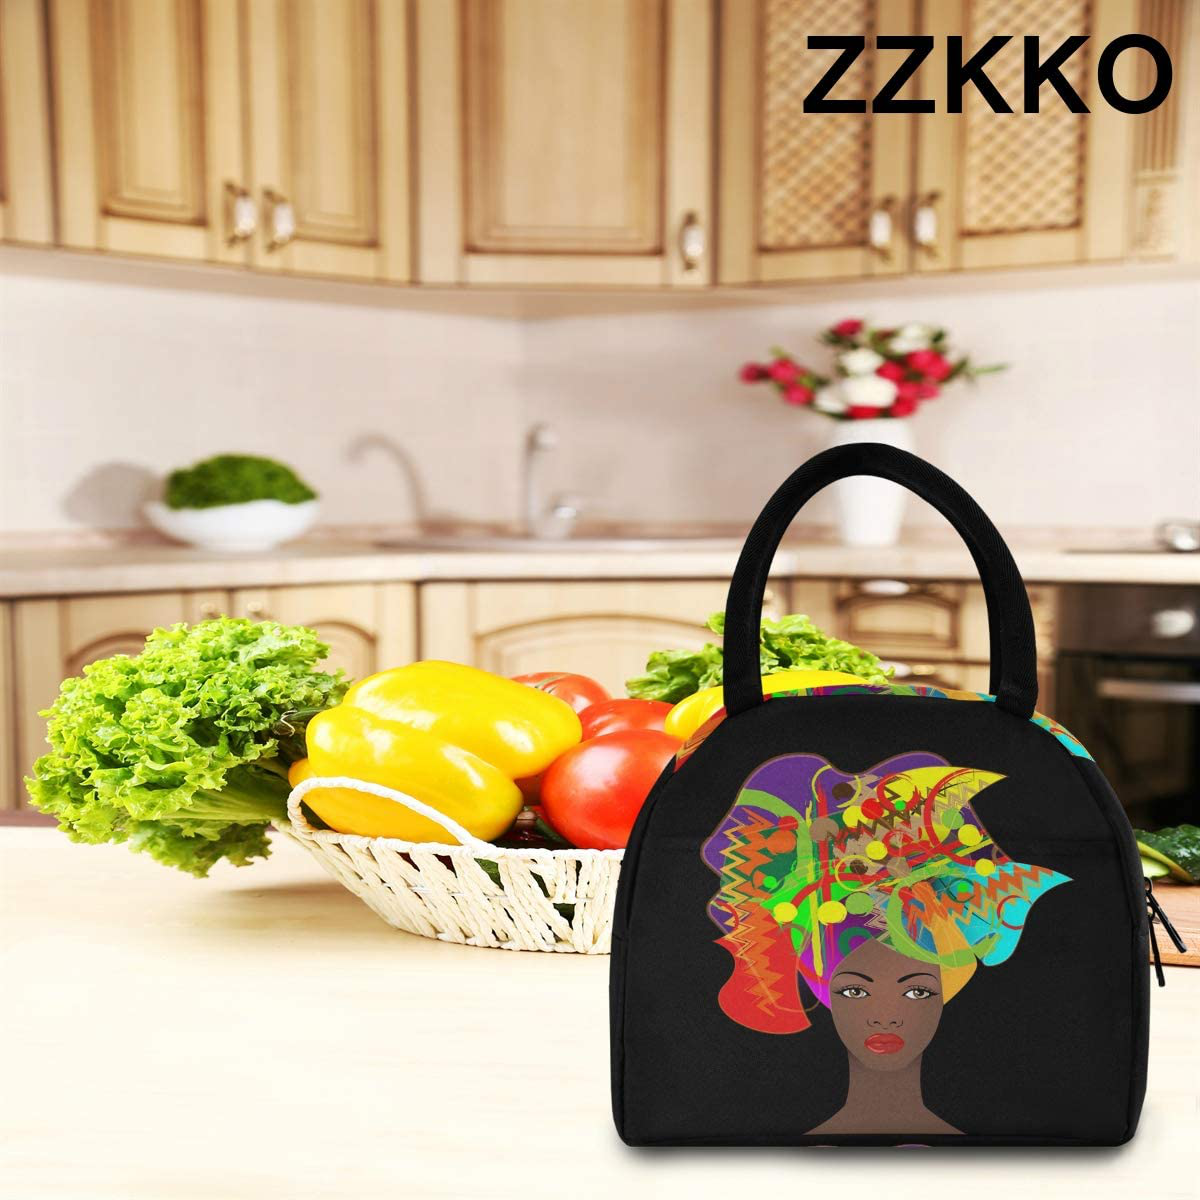 ZZKKO Floral Skull Lunch Bag Box Tote Organizer Lunch Container Insulated Zipper Meal Prep Cooler Handbag For Women Men Home School Office Outdoor Use